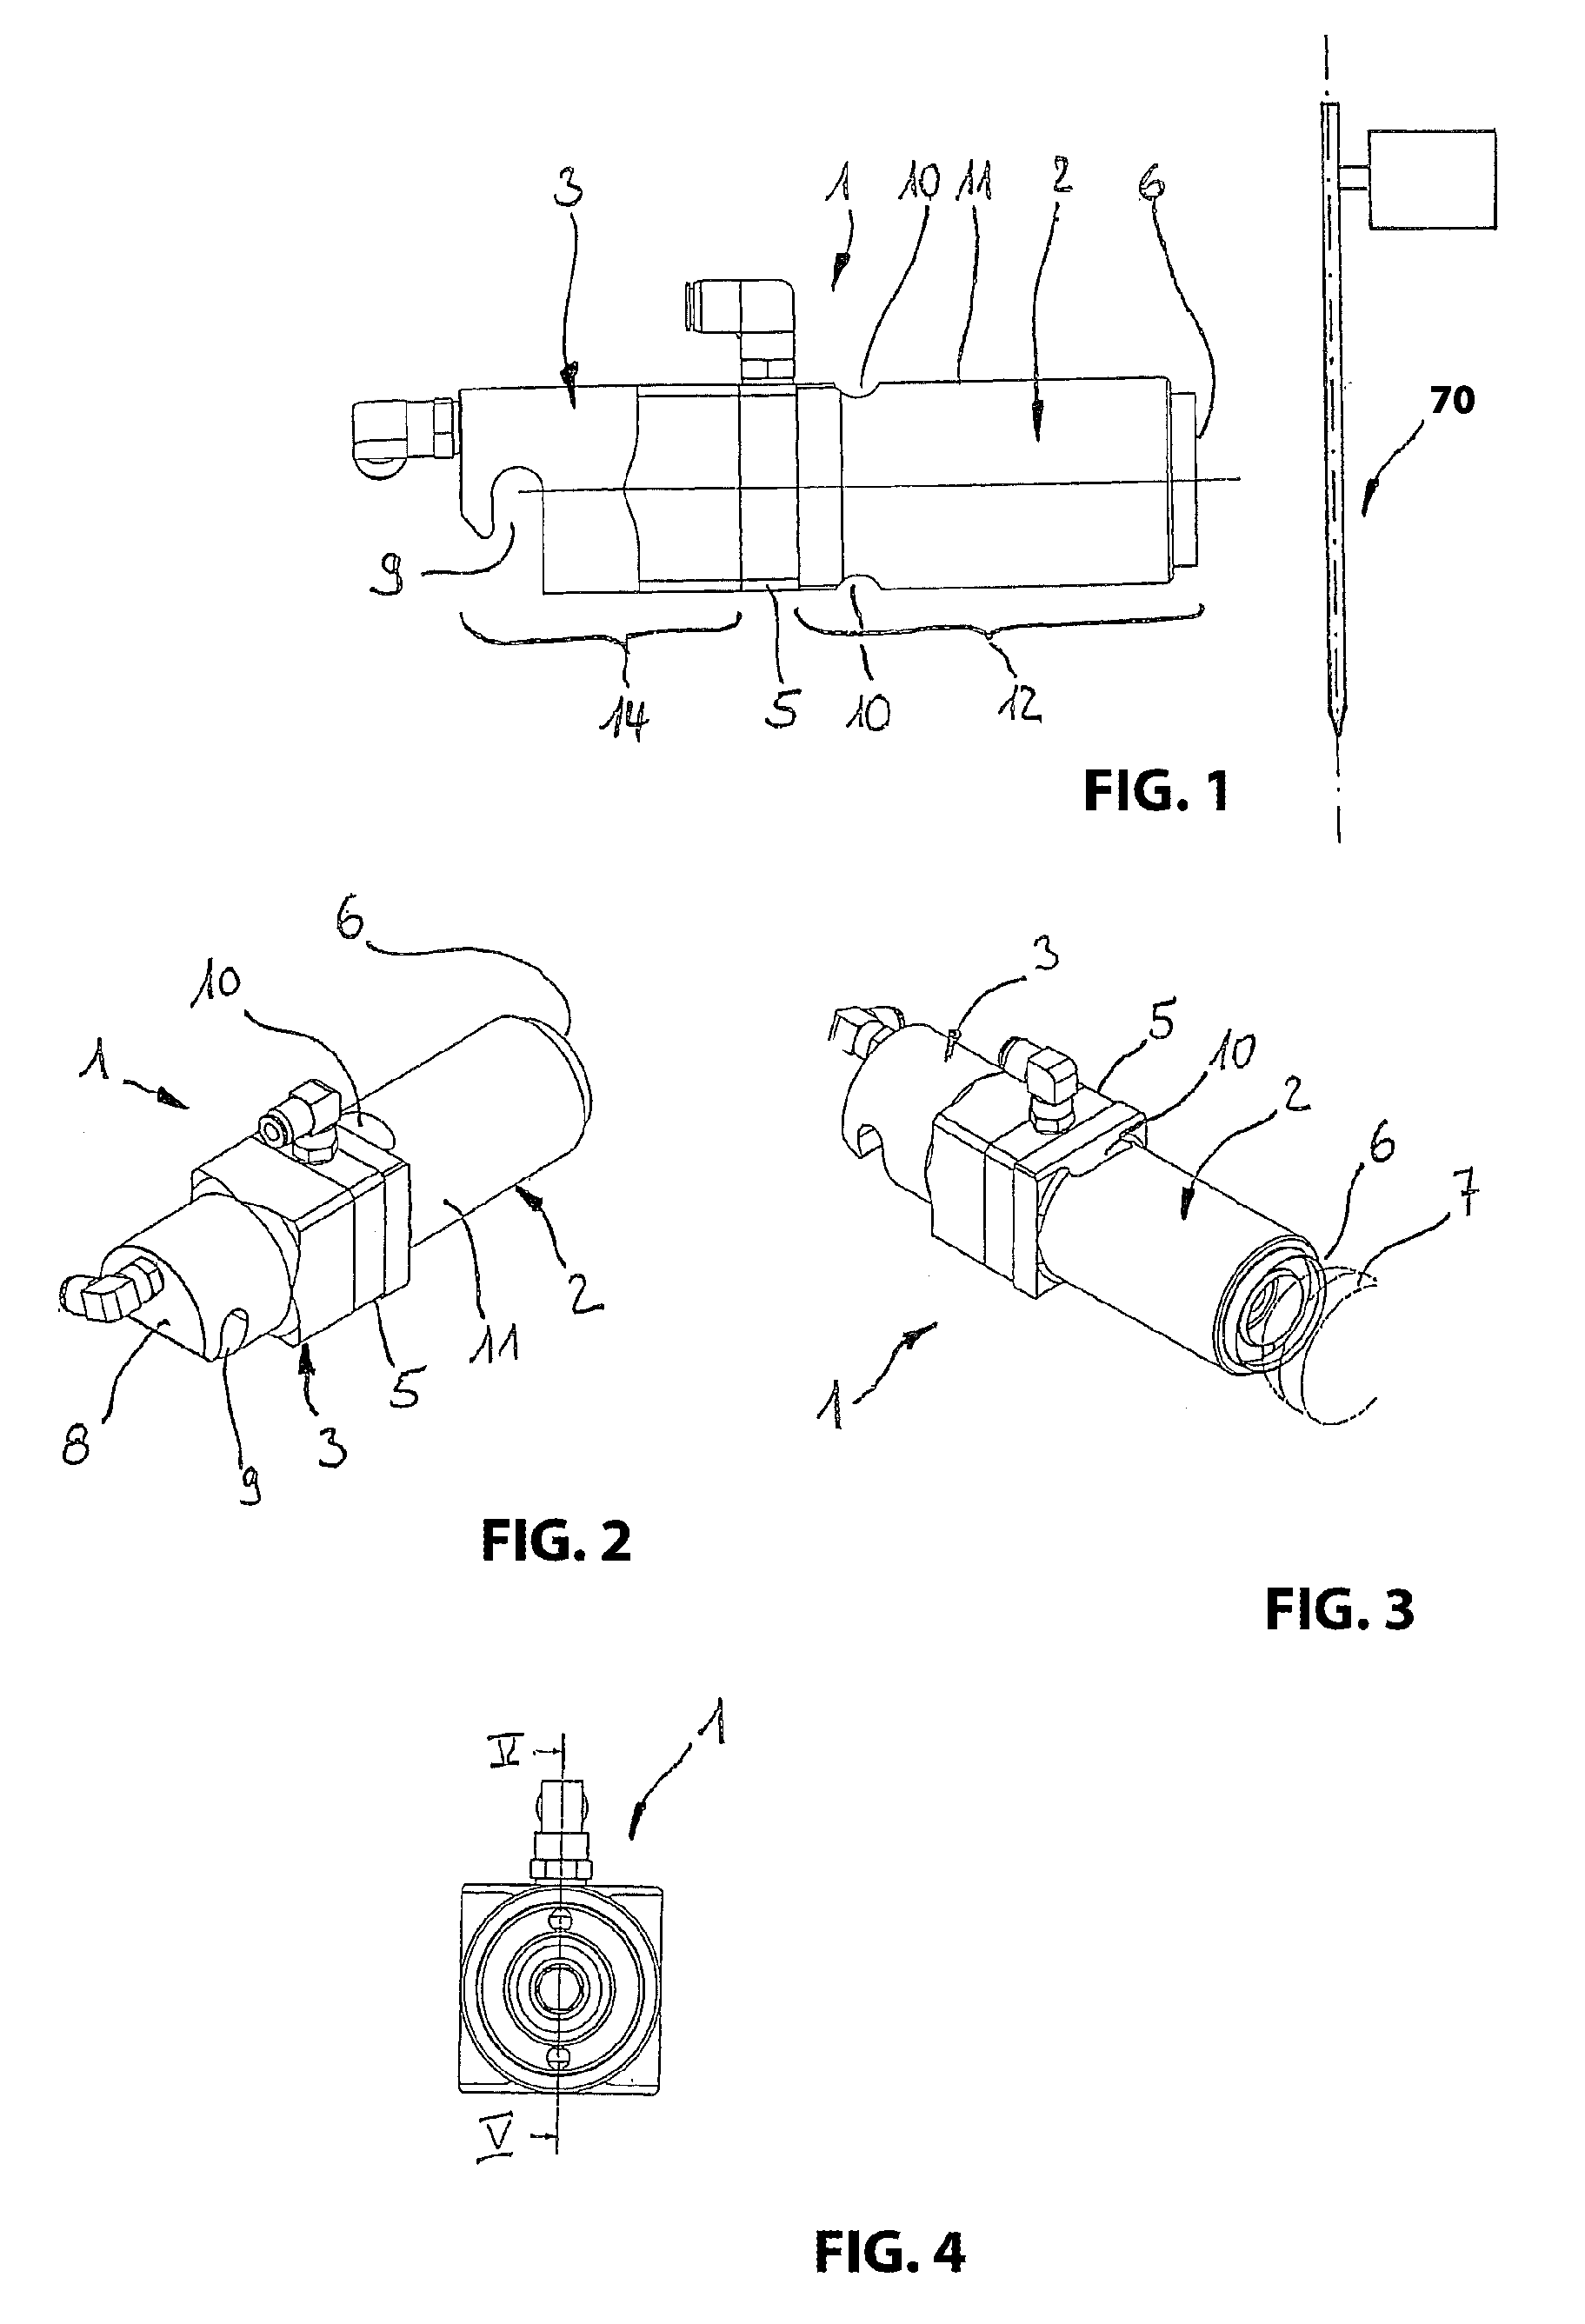 Method for cutting a loaf-shaped food using a cutting machine